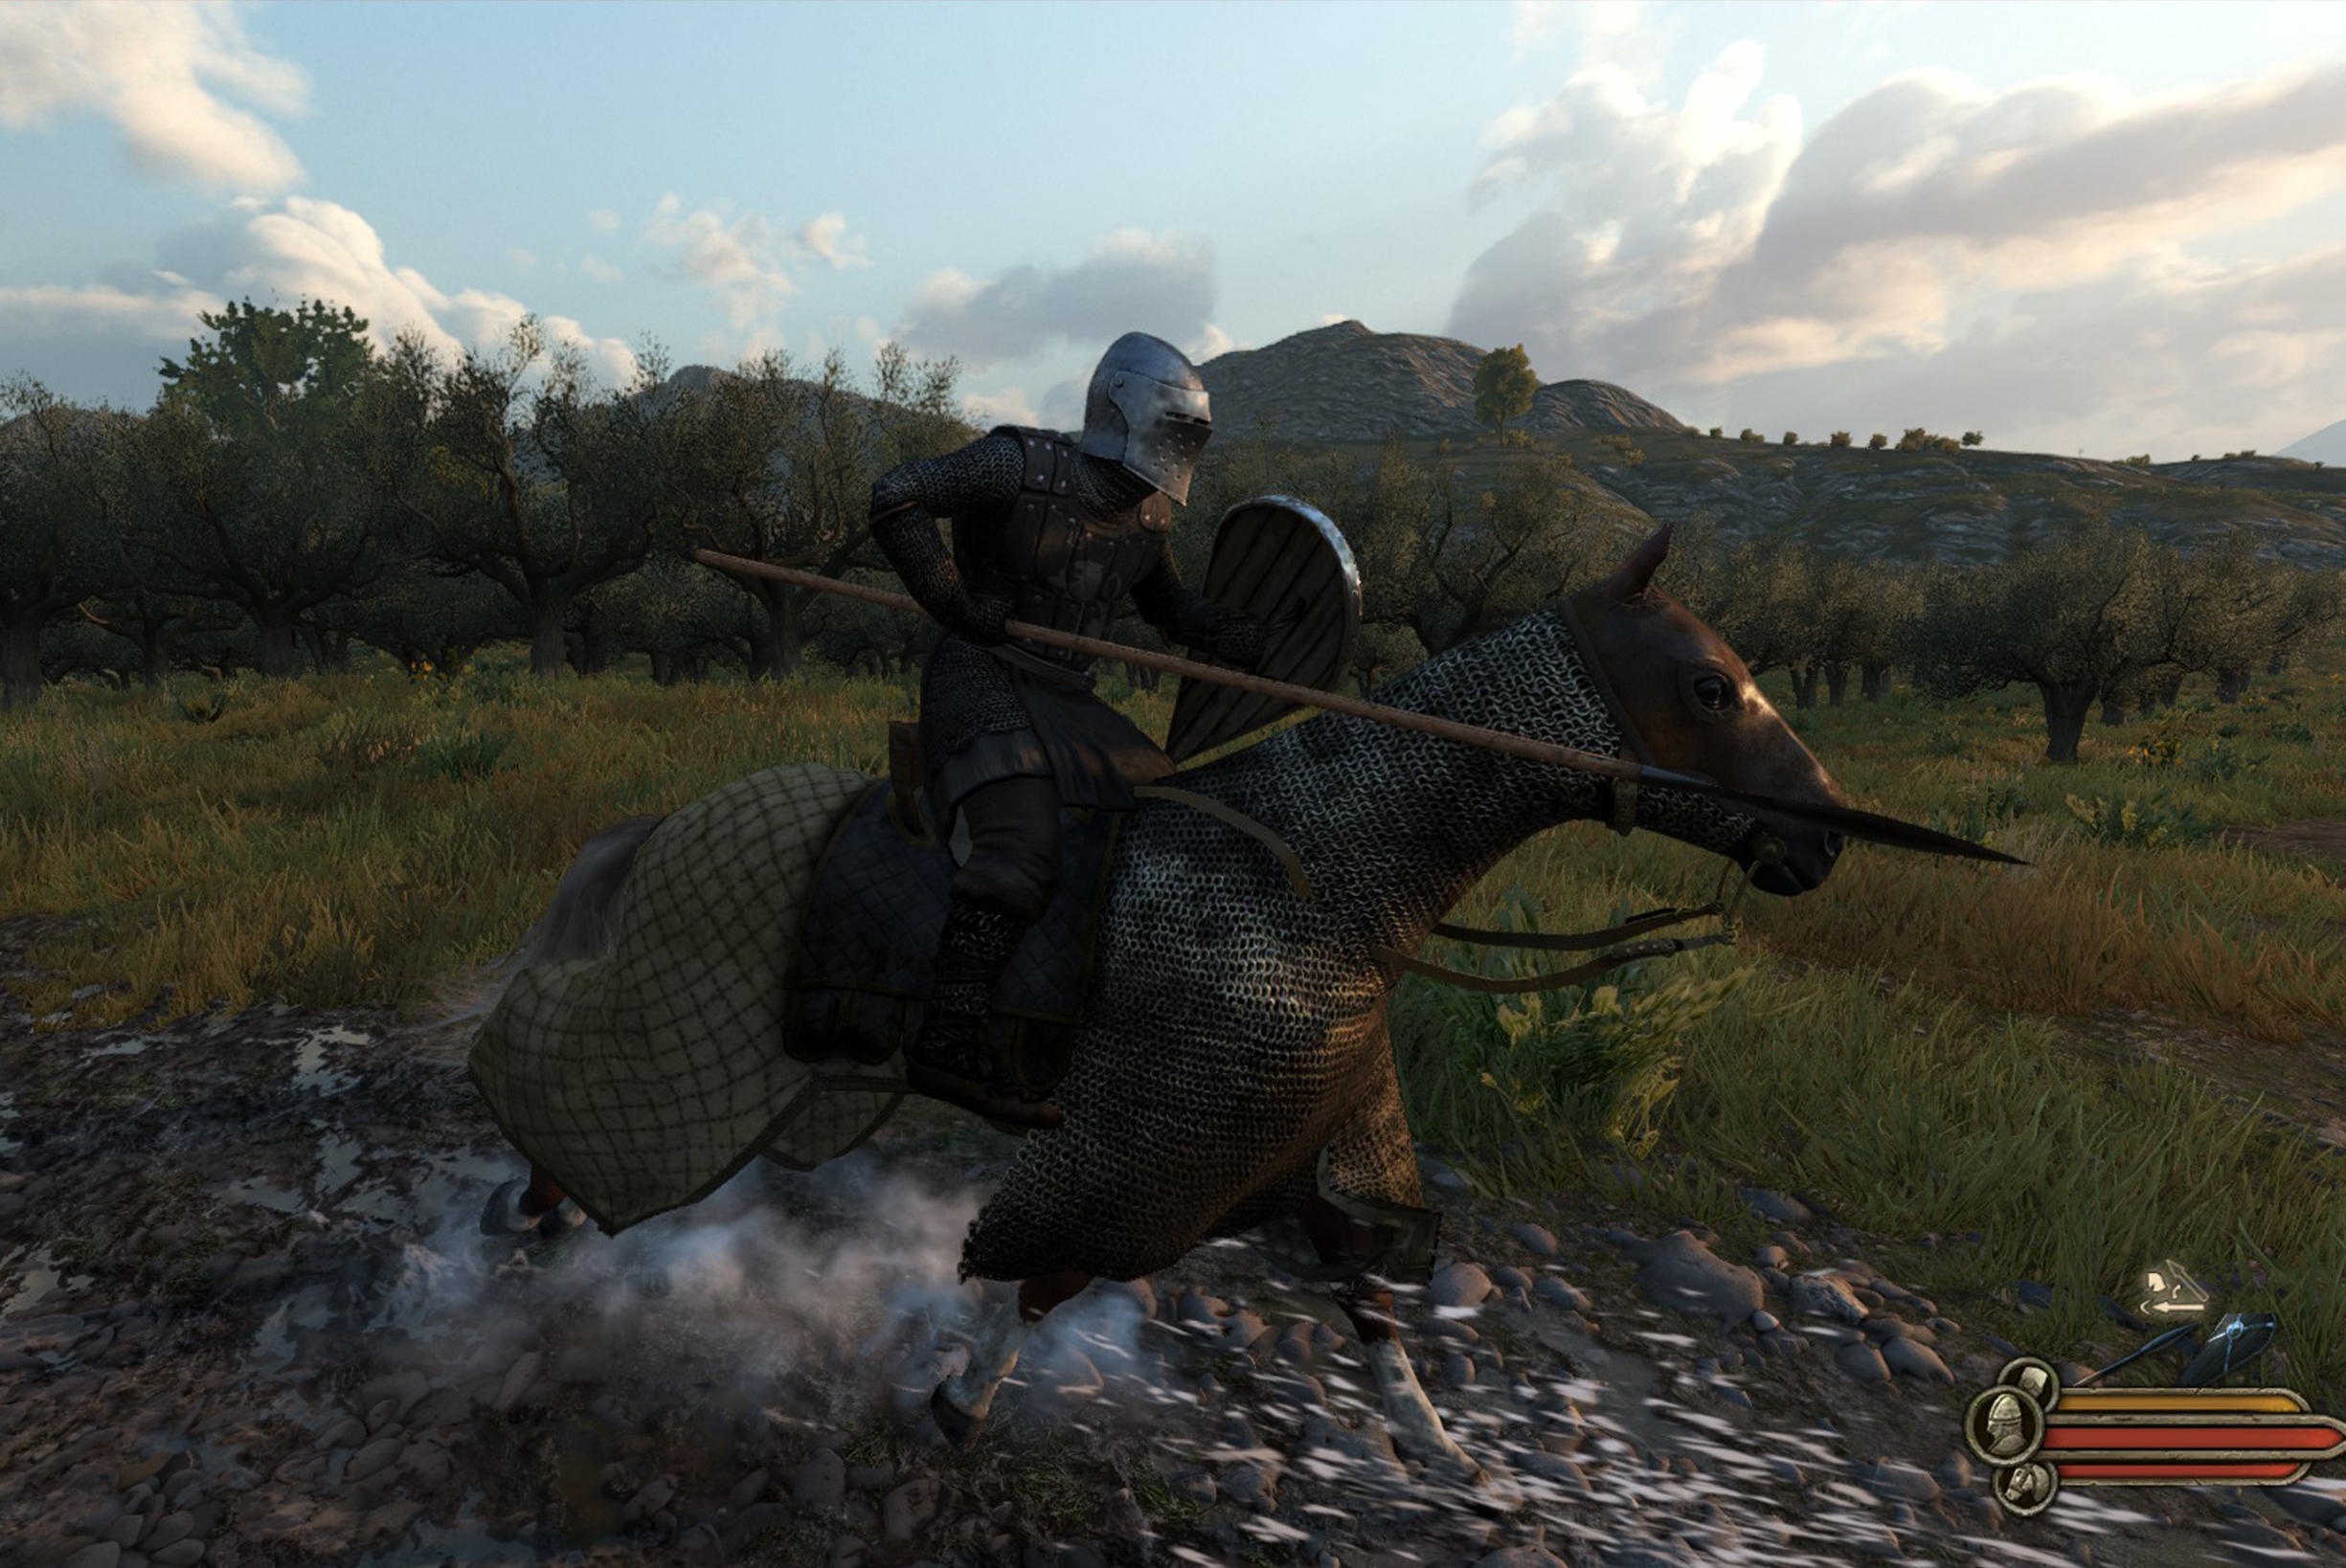 Warband bannerlord. Mount and Blade 2. Mount Blade Mount Blade 2. Маунт энд блейд 2 катафракт. Маунт энд блейд баннерлорд 1.